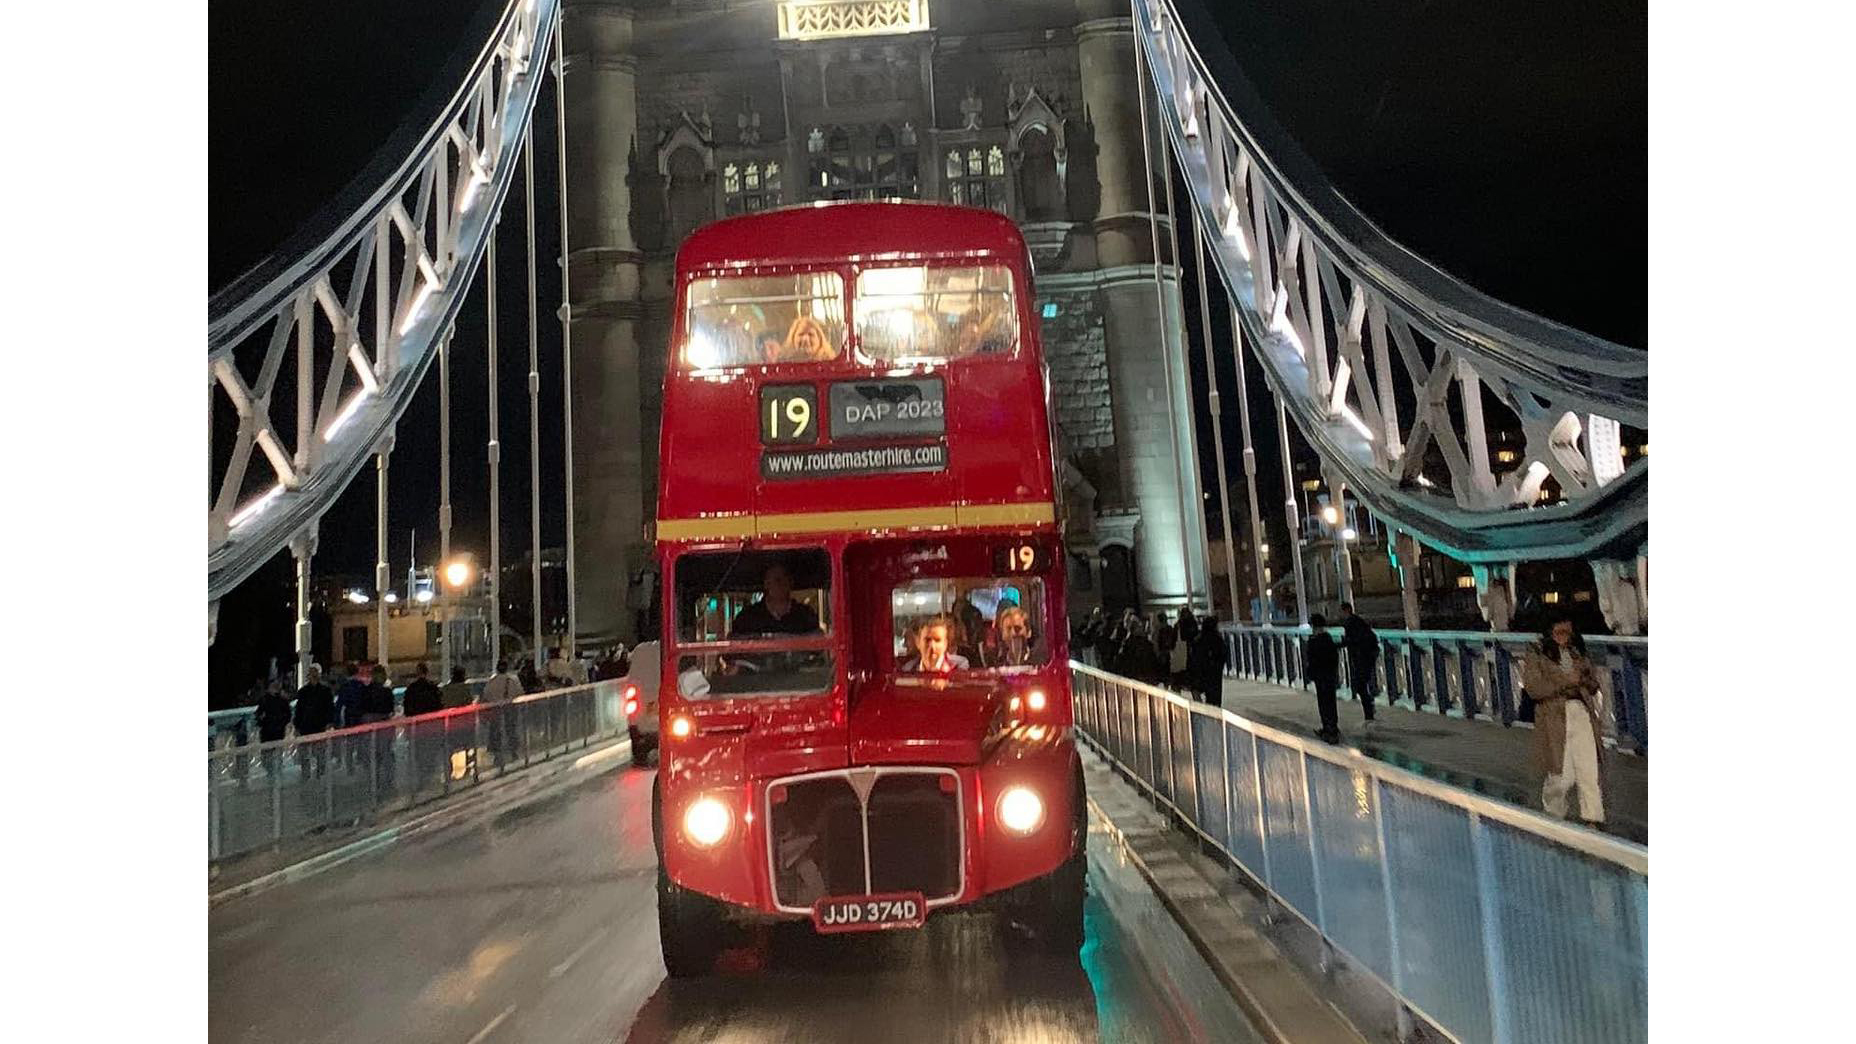 Red Routemaster bus with lights on being driven on London Bridge at night